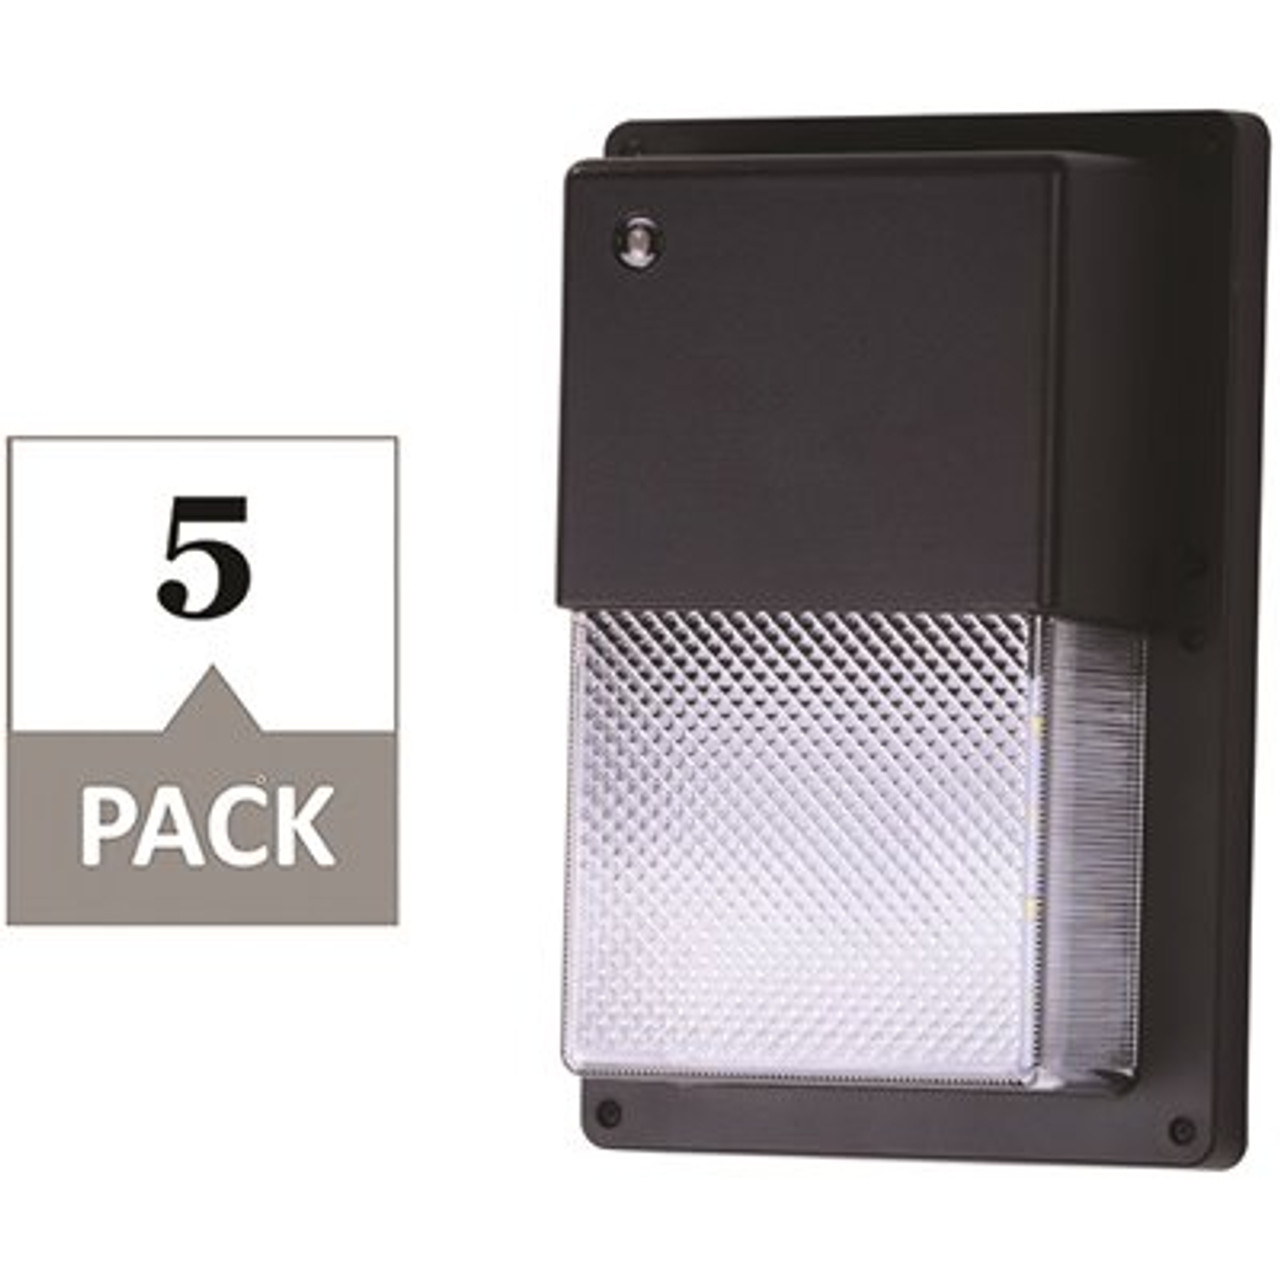 Simply Conserve 100- Watt Equivalent Integrated LED Black Dusk to Dawn Wall Pack Light 4000K (5-Pack)